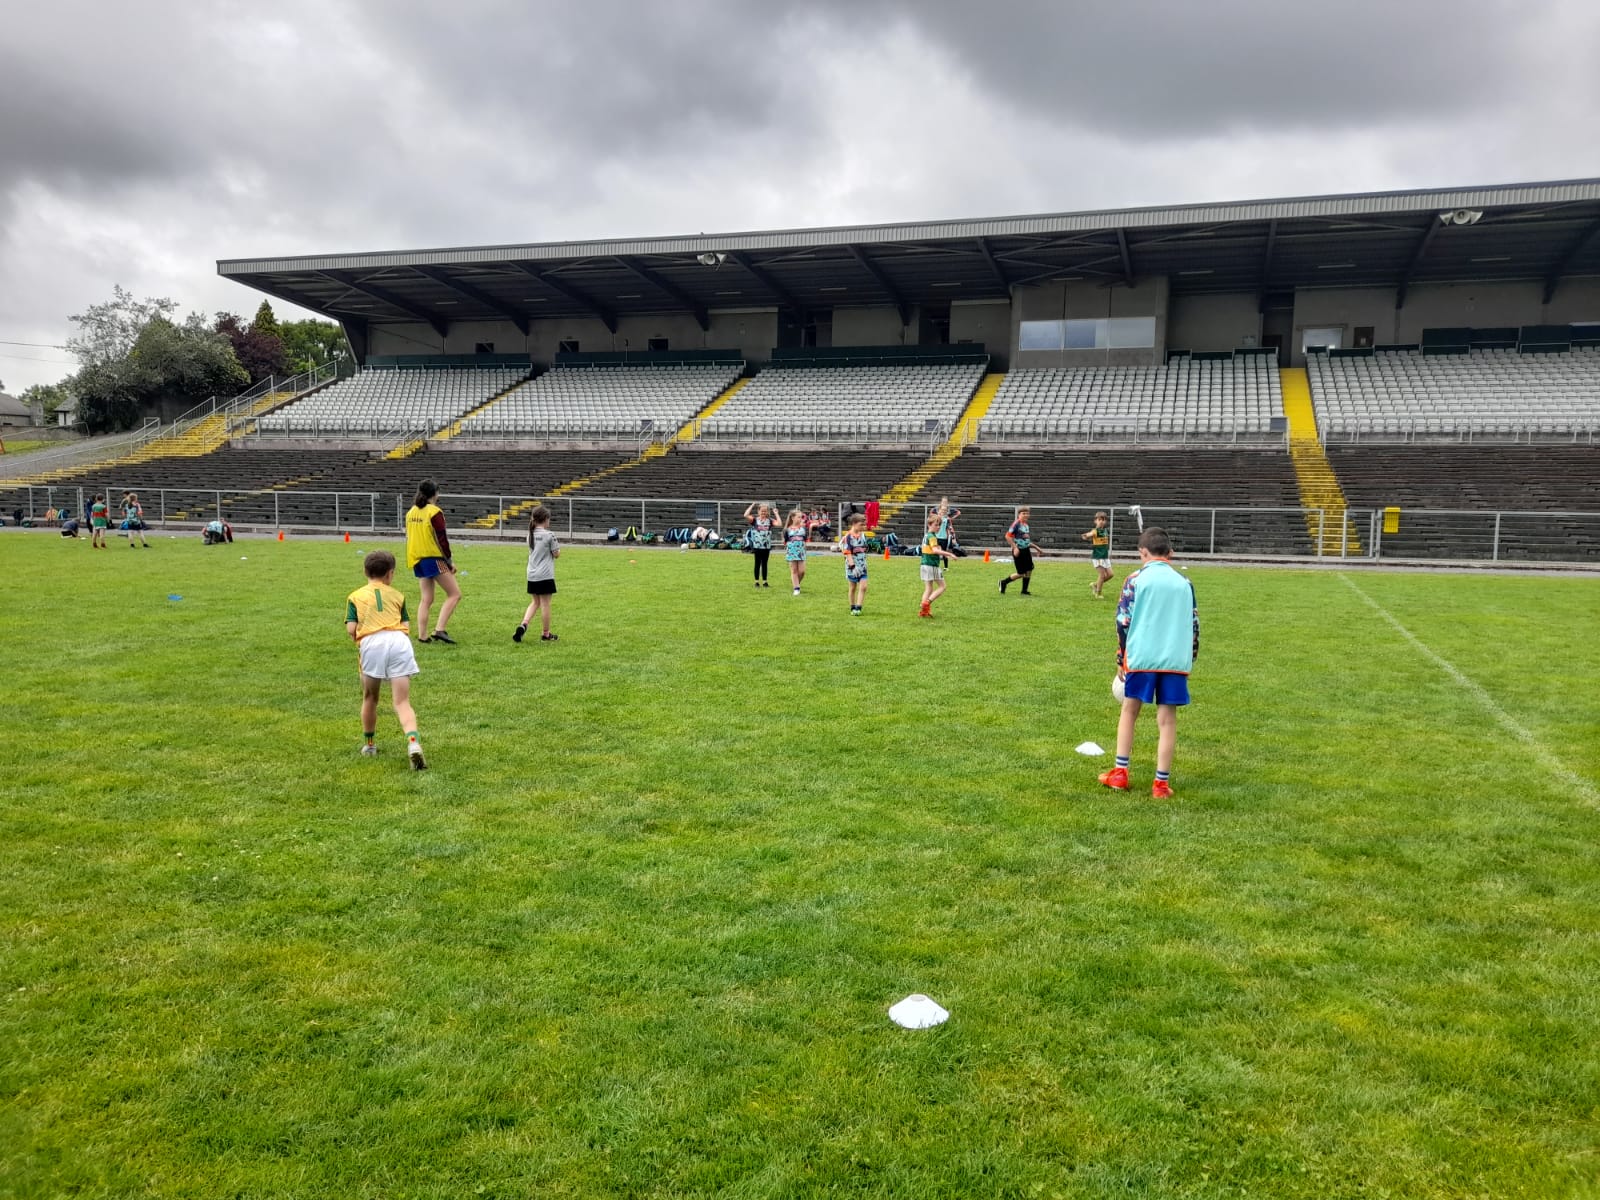 Cul Camps head to Carrick and Emyvale for Week 3 after bumper week in Castleblayney and Monaghan